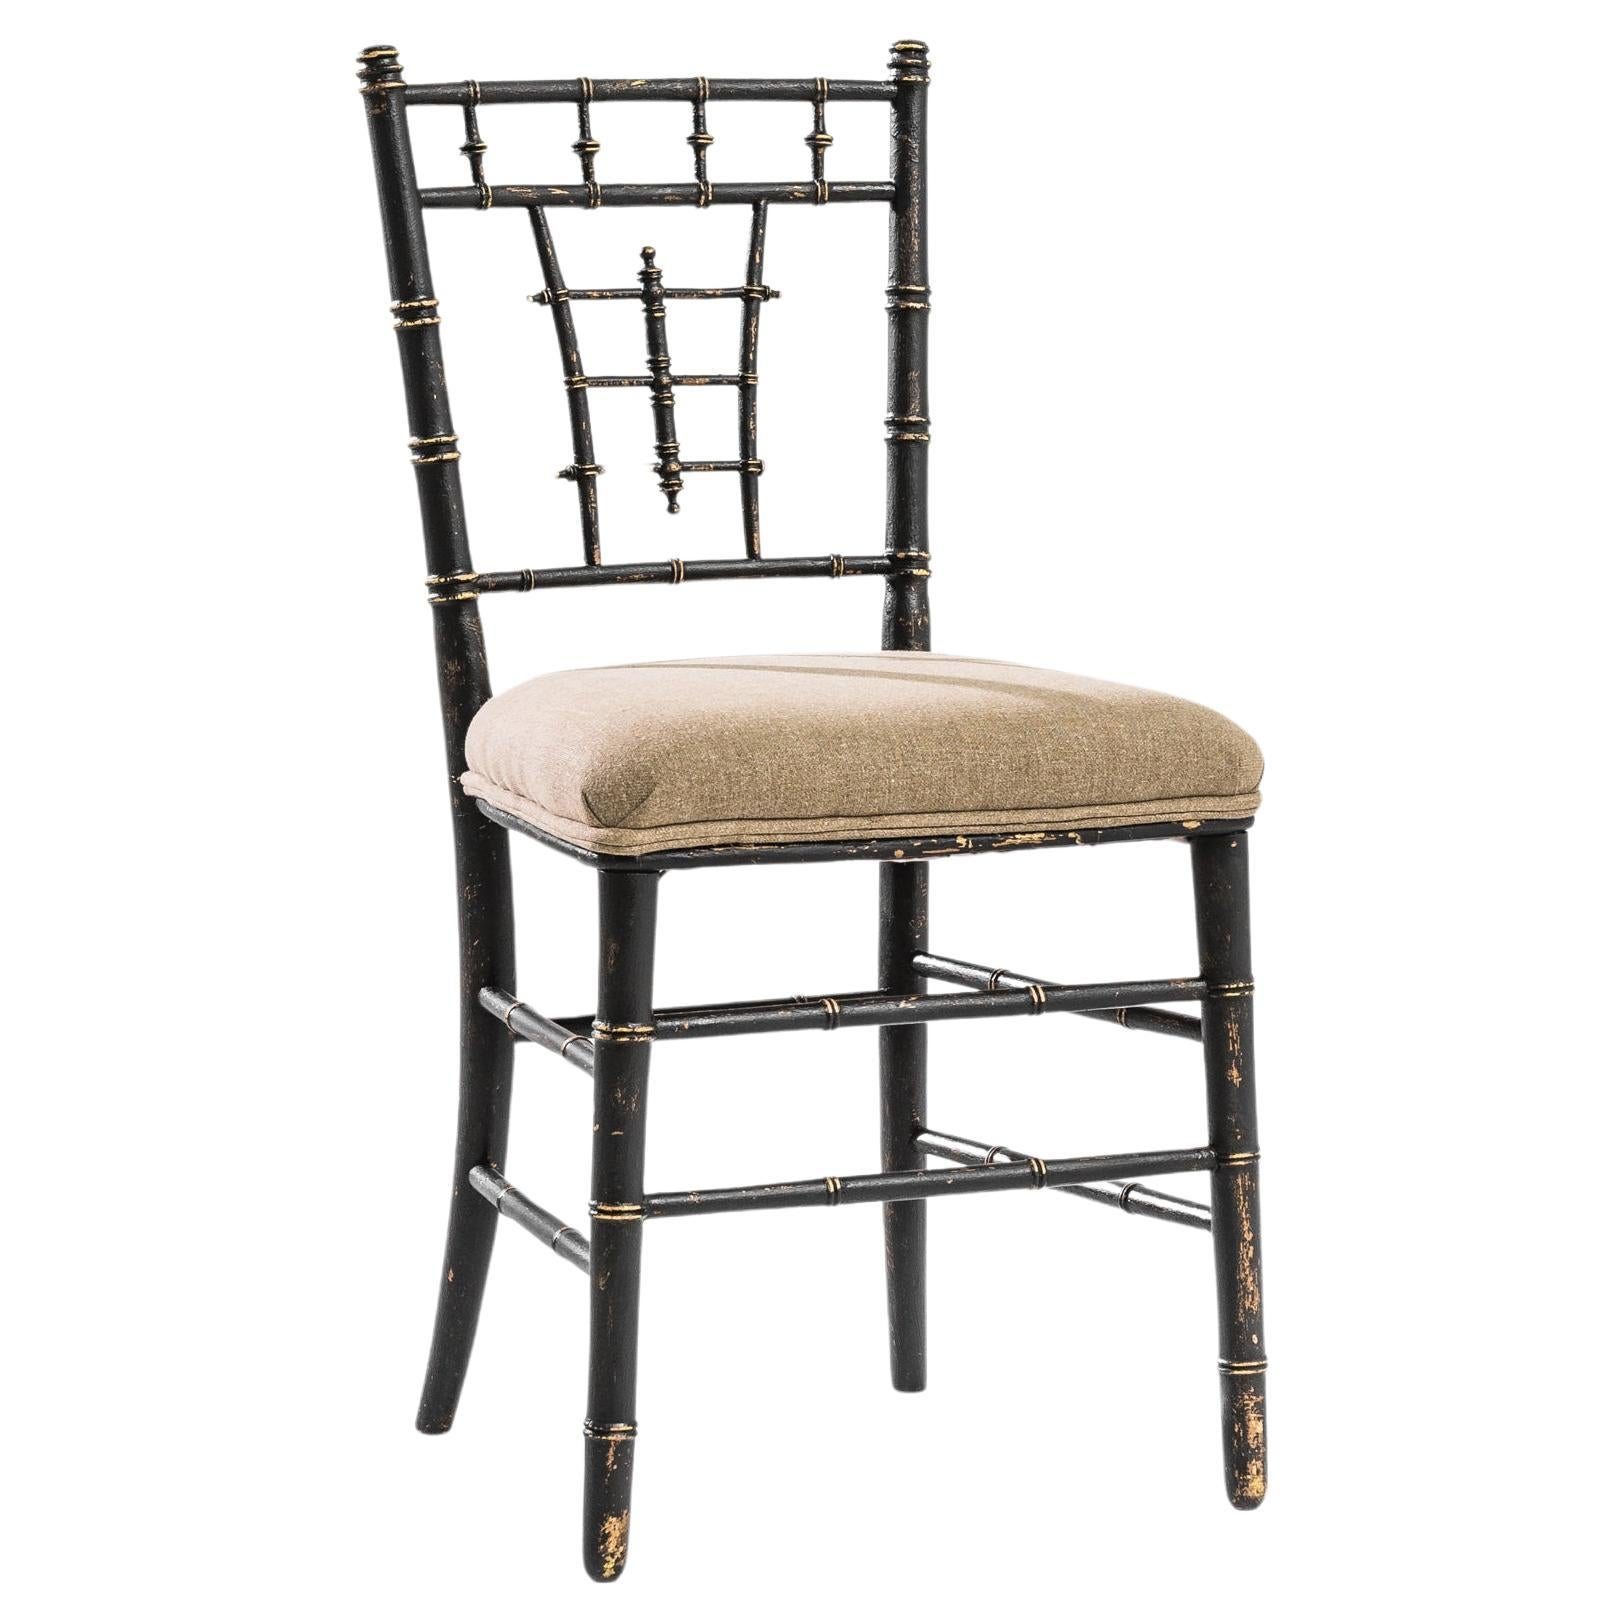 1880s French Wooden Dining Chair with Upholstered Seat For Sale